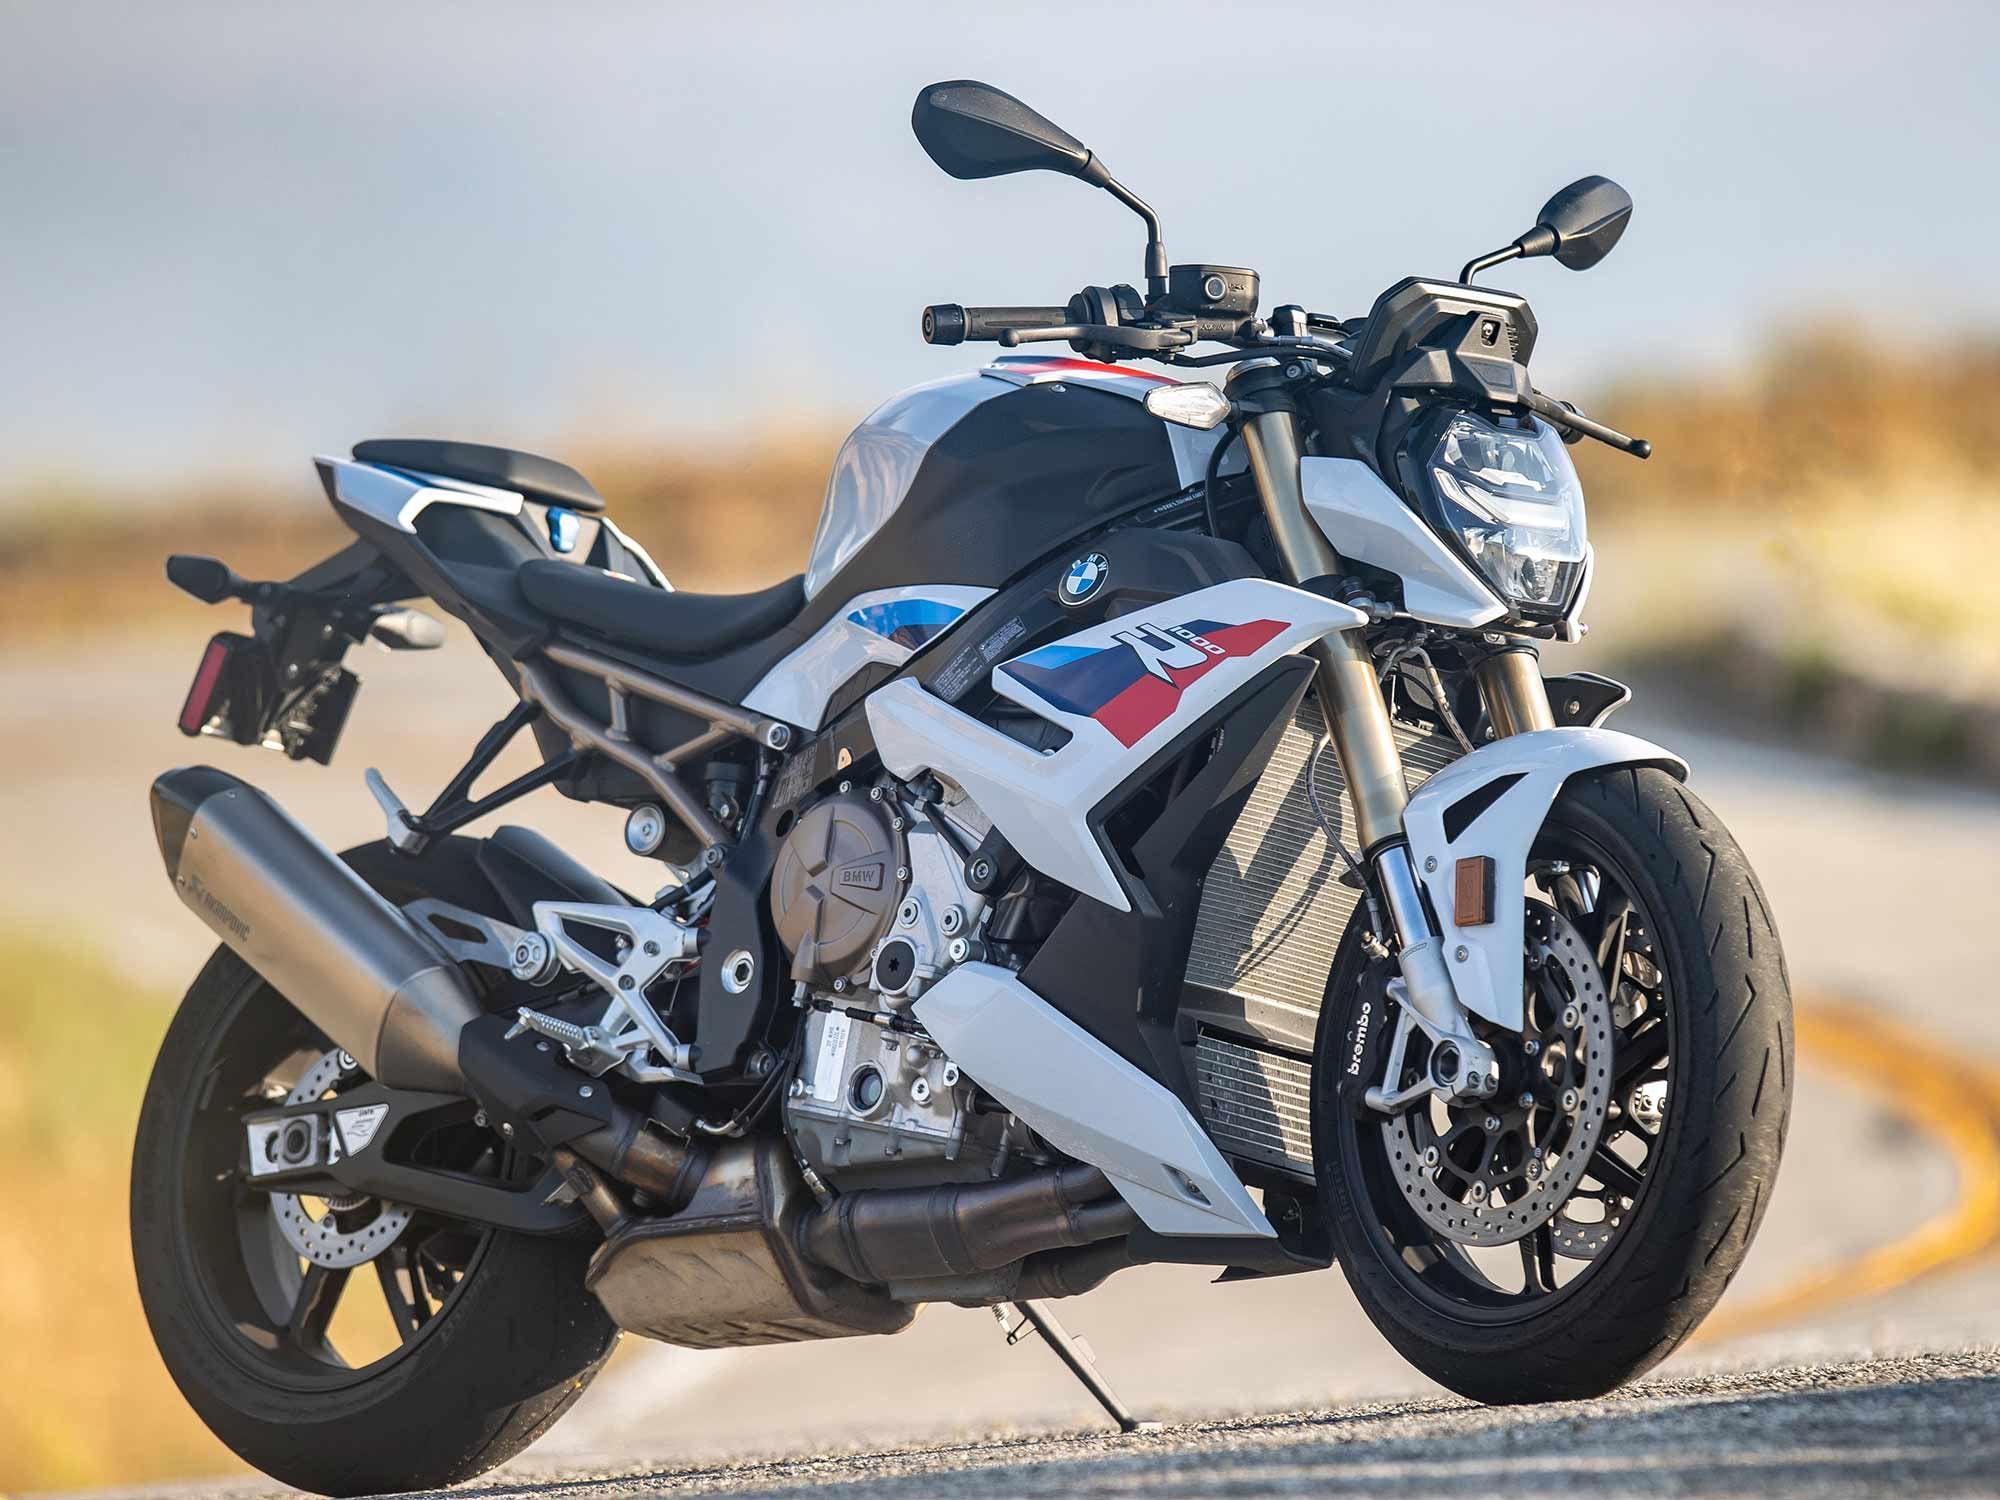 BMW has matched the S 1000 R’s potent engine with a chassis that delivers excellent handling.